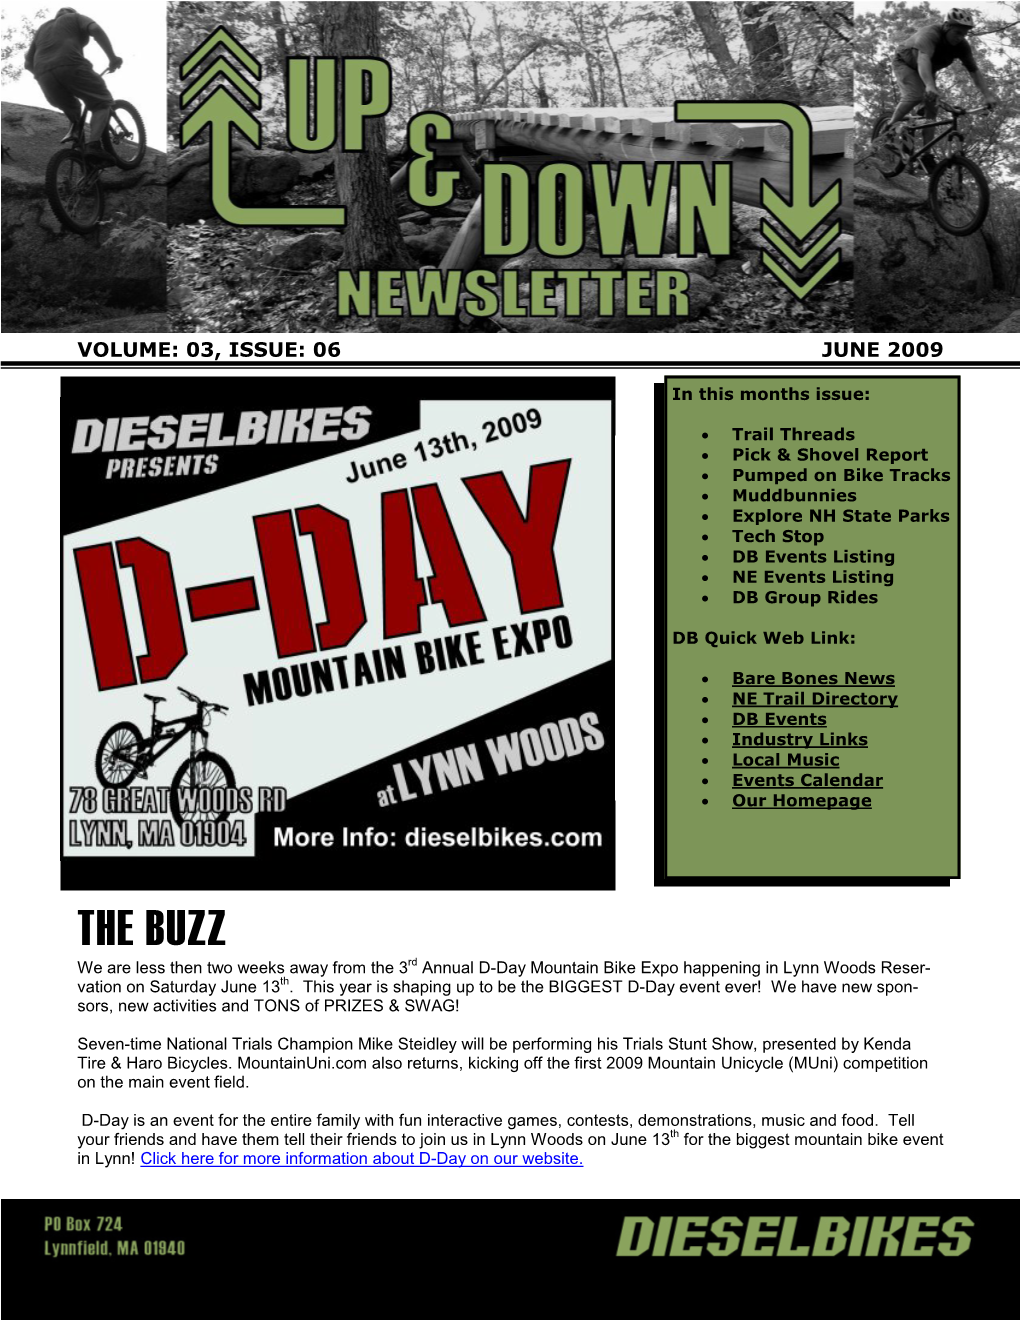 Dieselbikes Monthly Newsletter